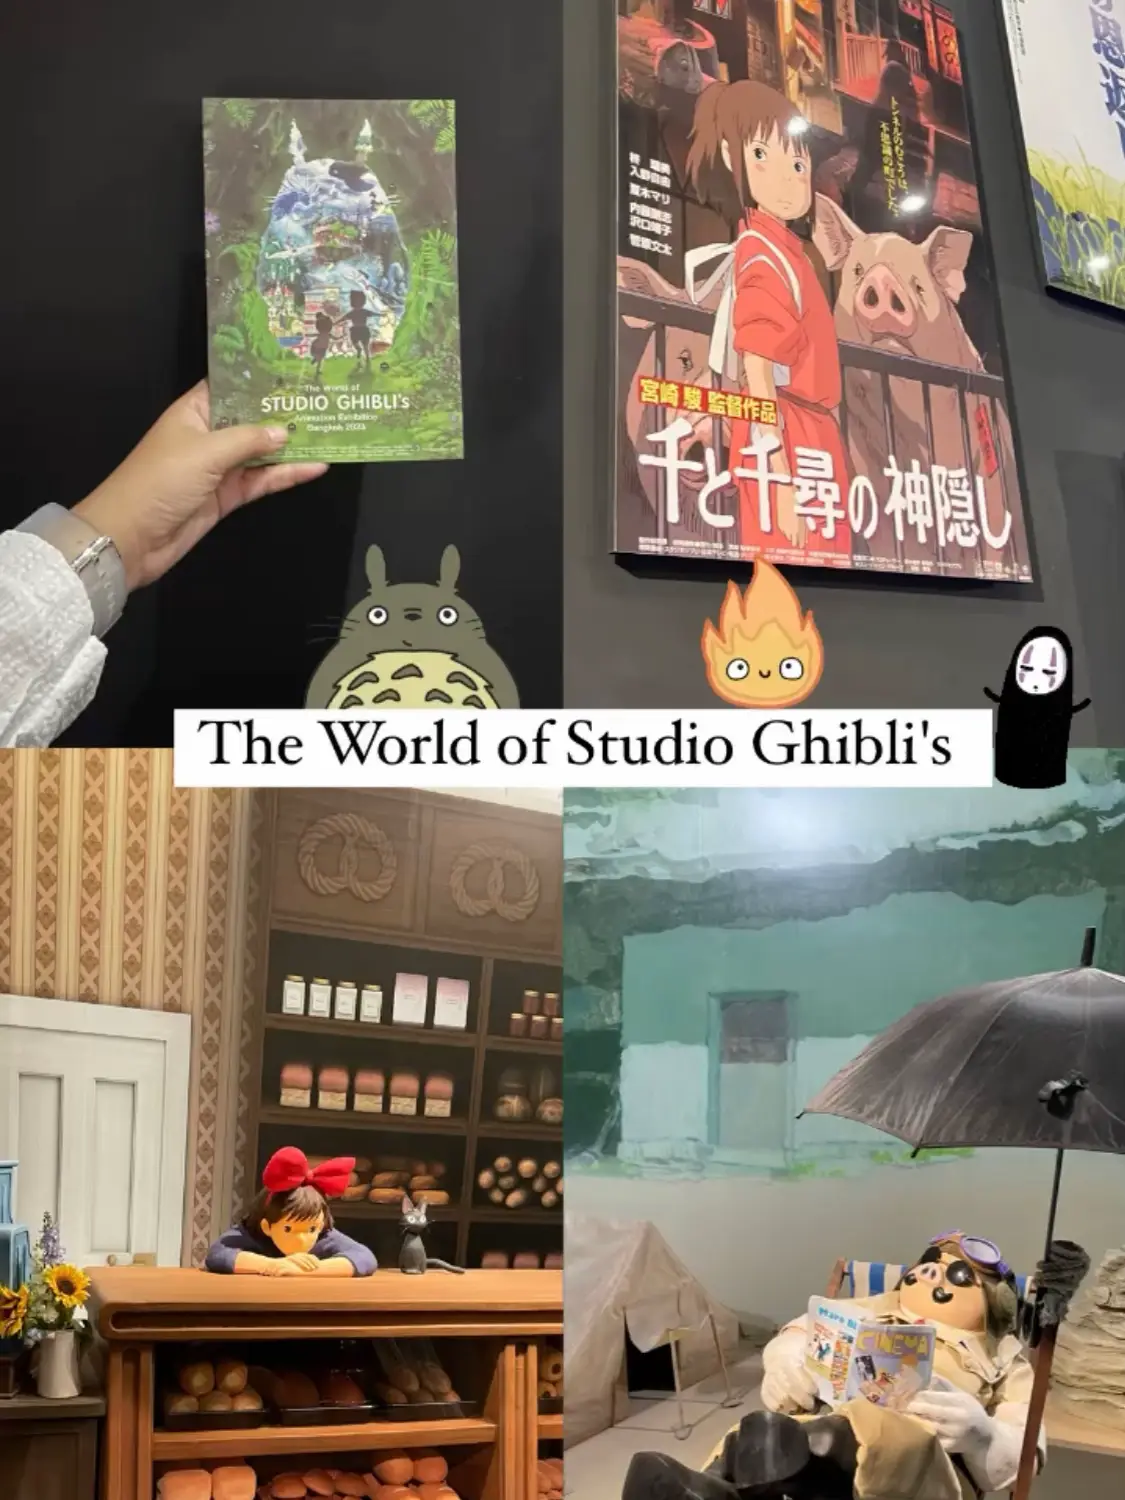 The World of Studio Ghibli's, Gallery posted by ddoubleae